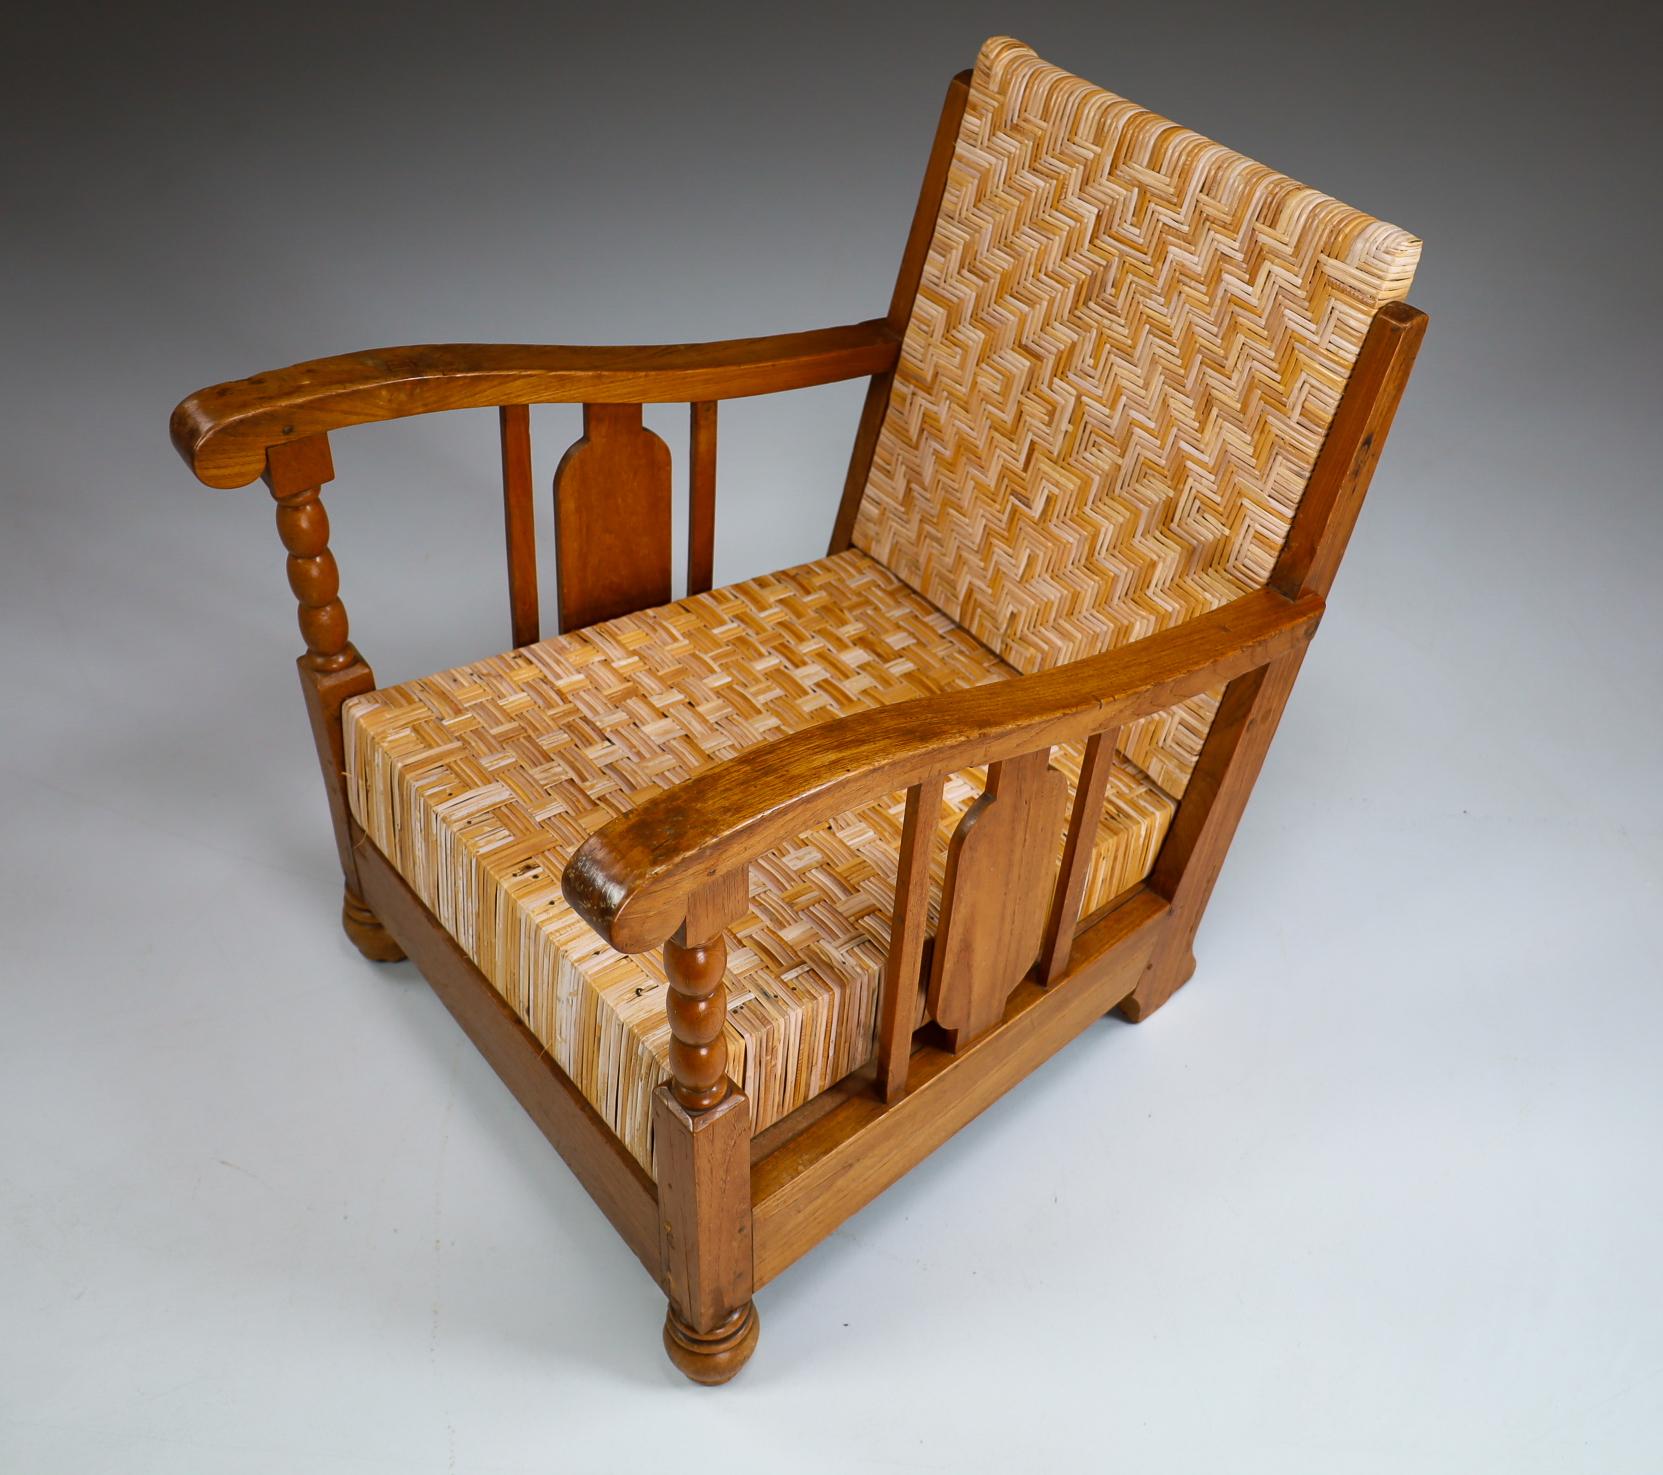 20th Century British Colonial Rattan And Wood Art Deco Lounge Chair, India 1920s For Sale